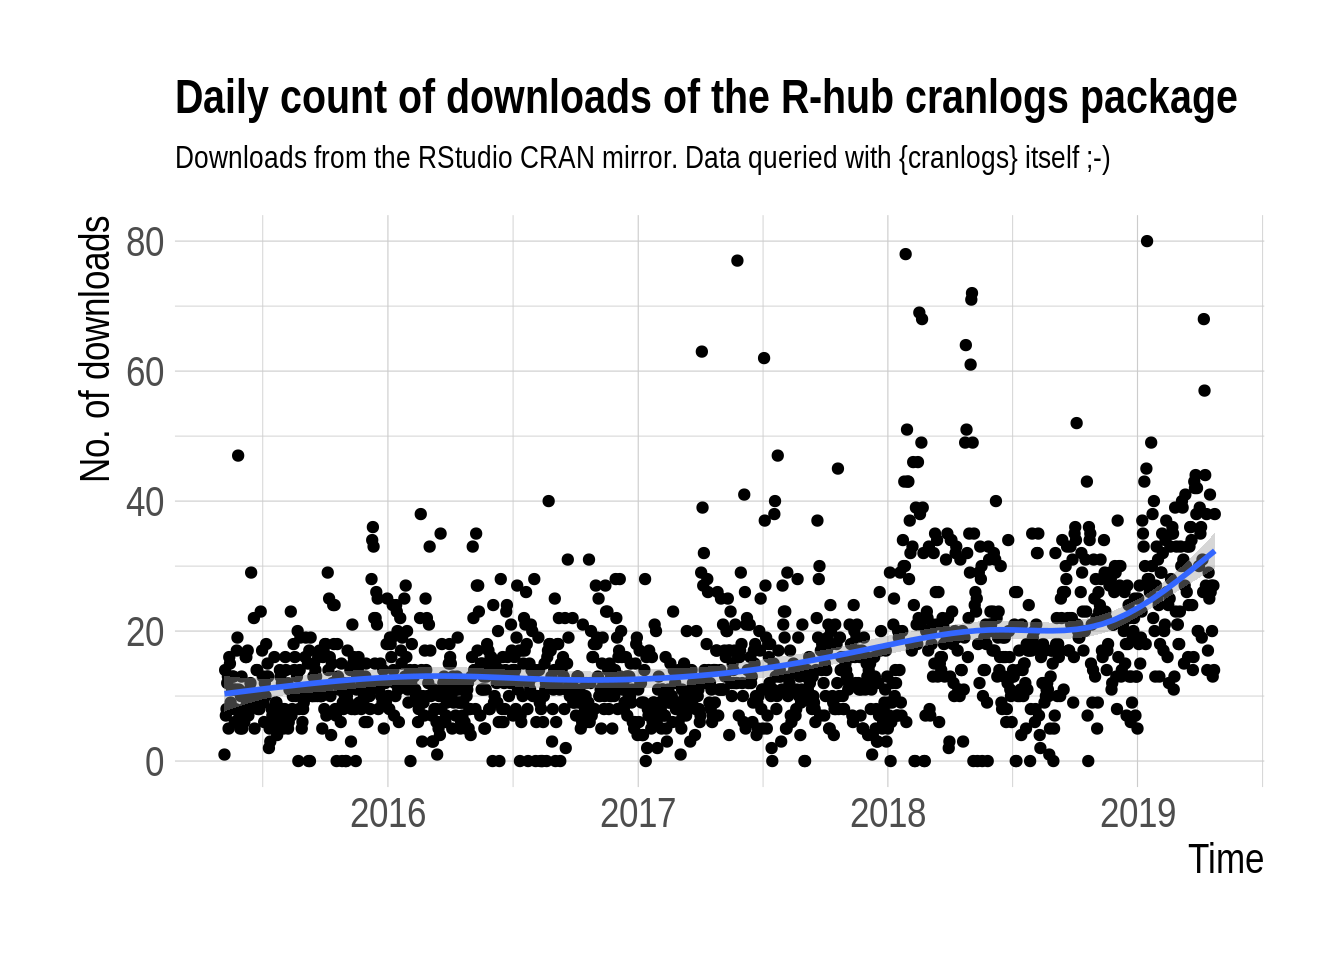 Time series of cranlogs downloads showing a few dozens of downloads a day, with an upward trend since 2018.